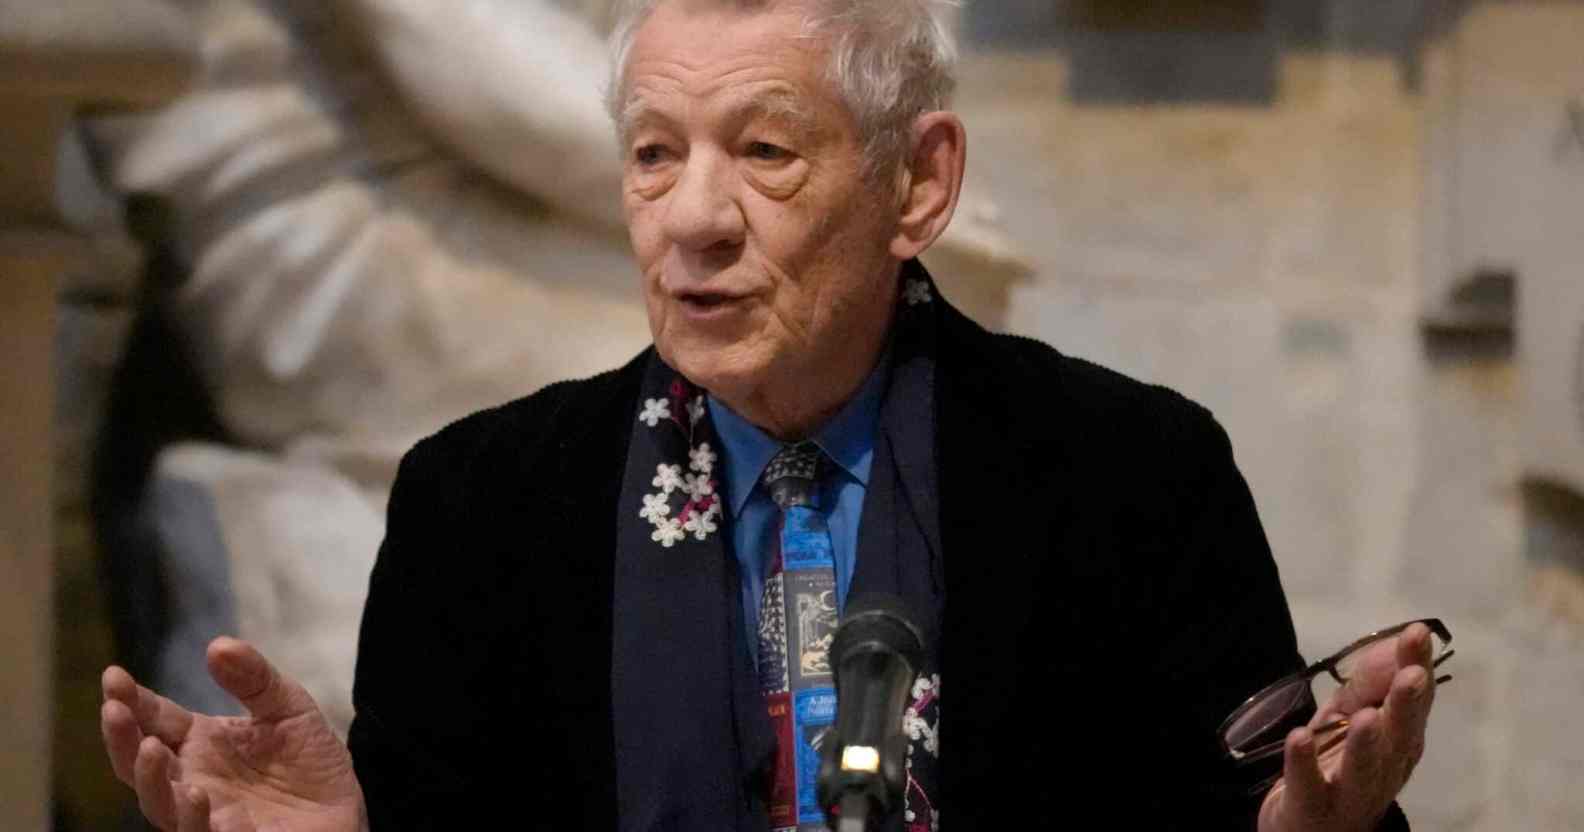 British actor Sir Ian McKellen speaks during a service to dedicate a memorial stone to actor Sir John Gielgud in Poets' Corner at Westminster Abbey on April 26, 2022 in London, England.